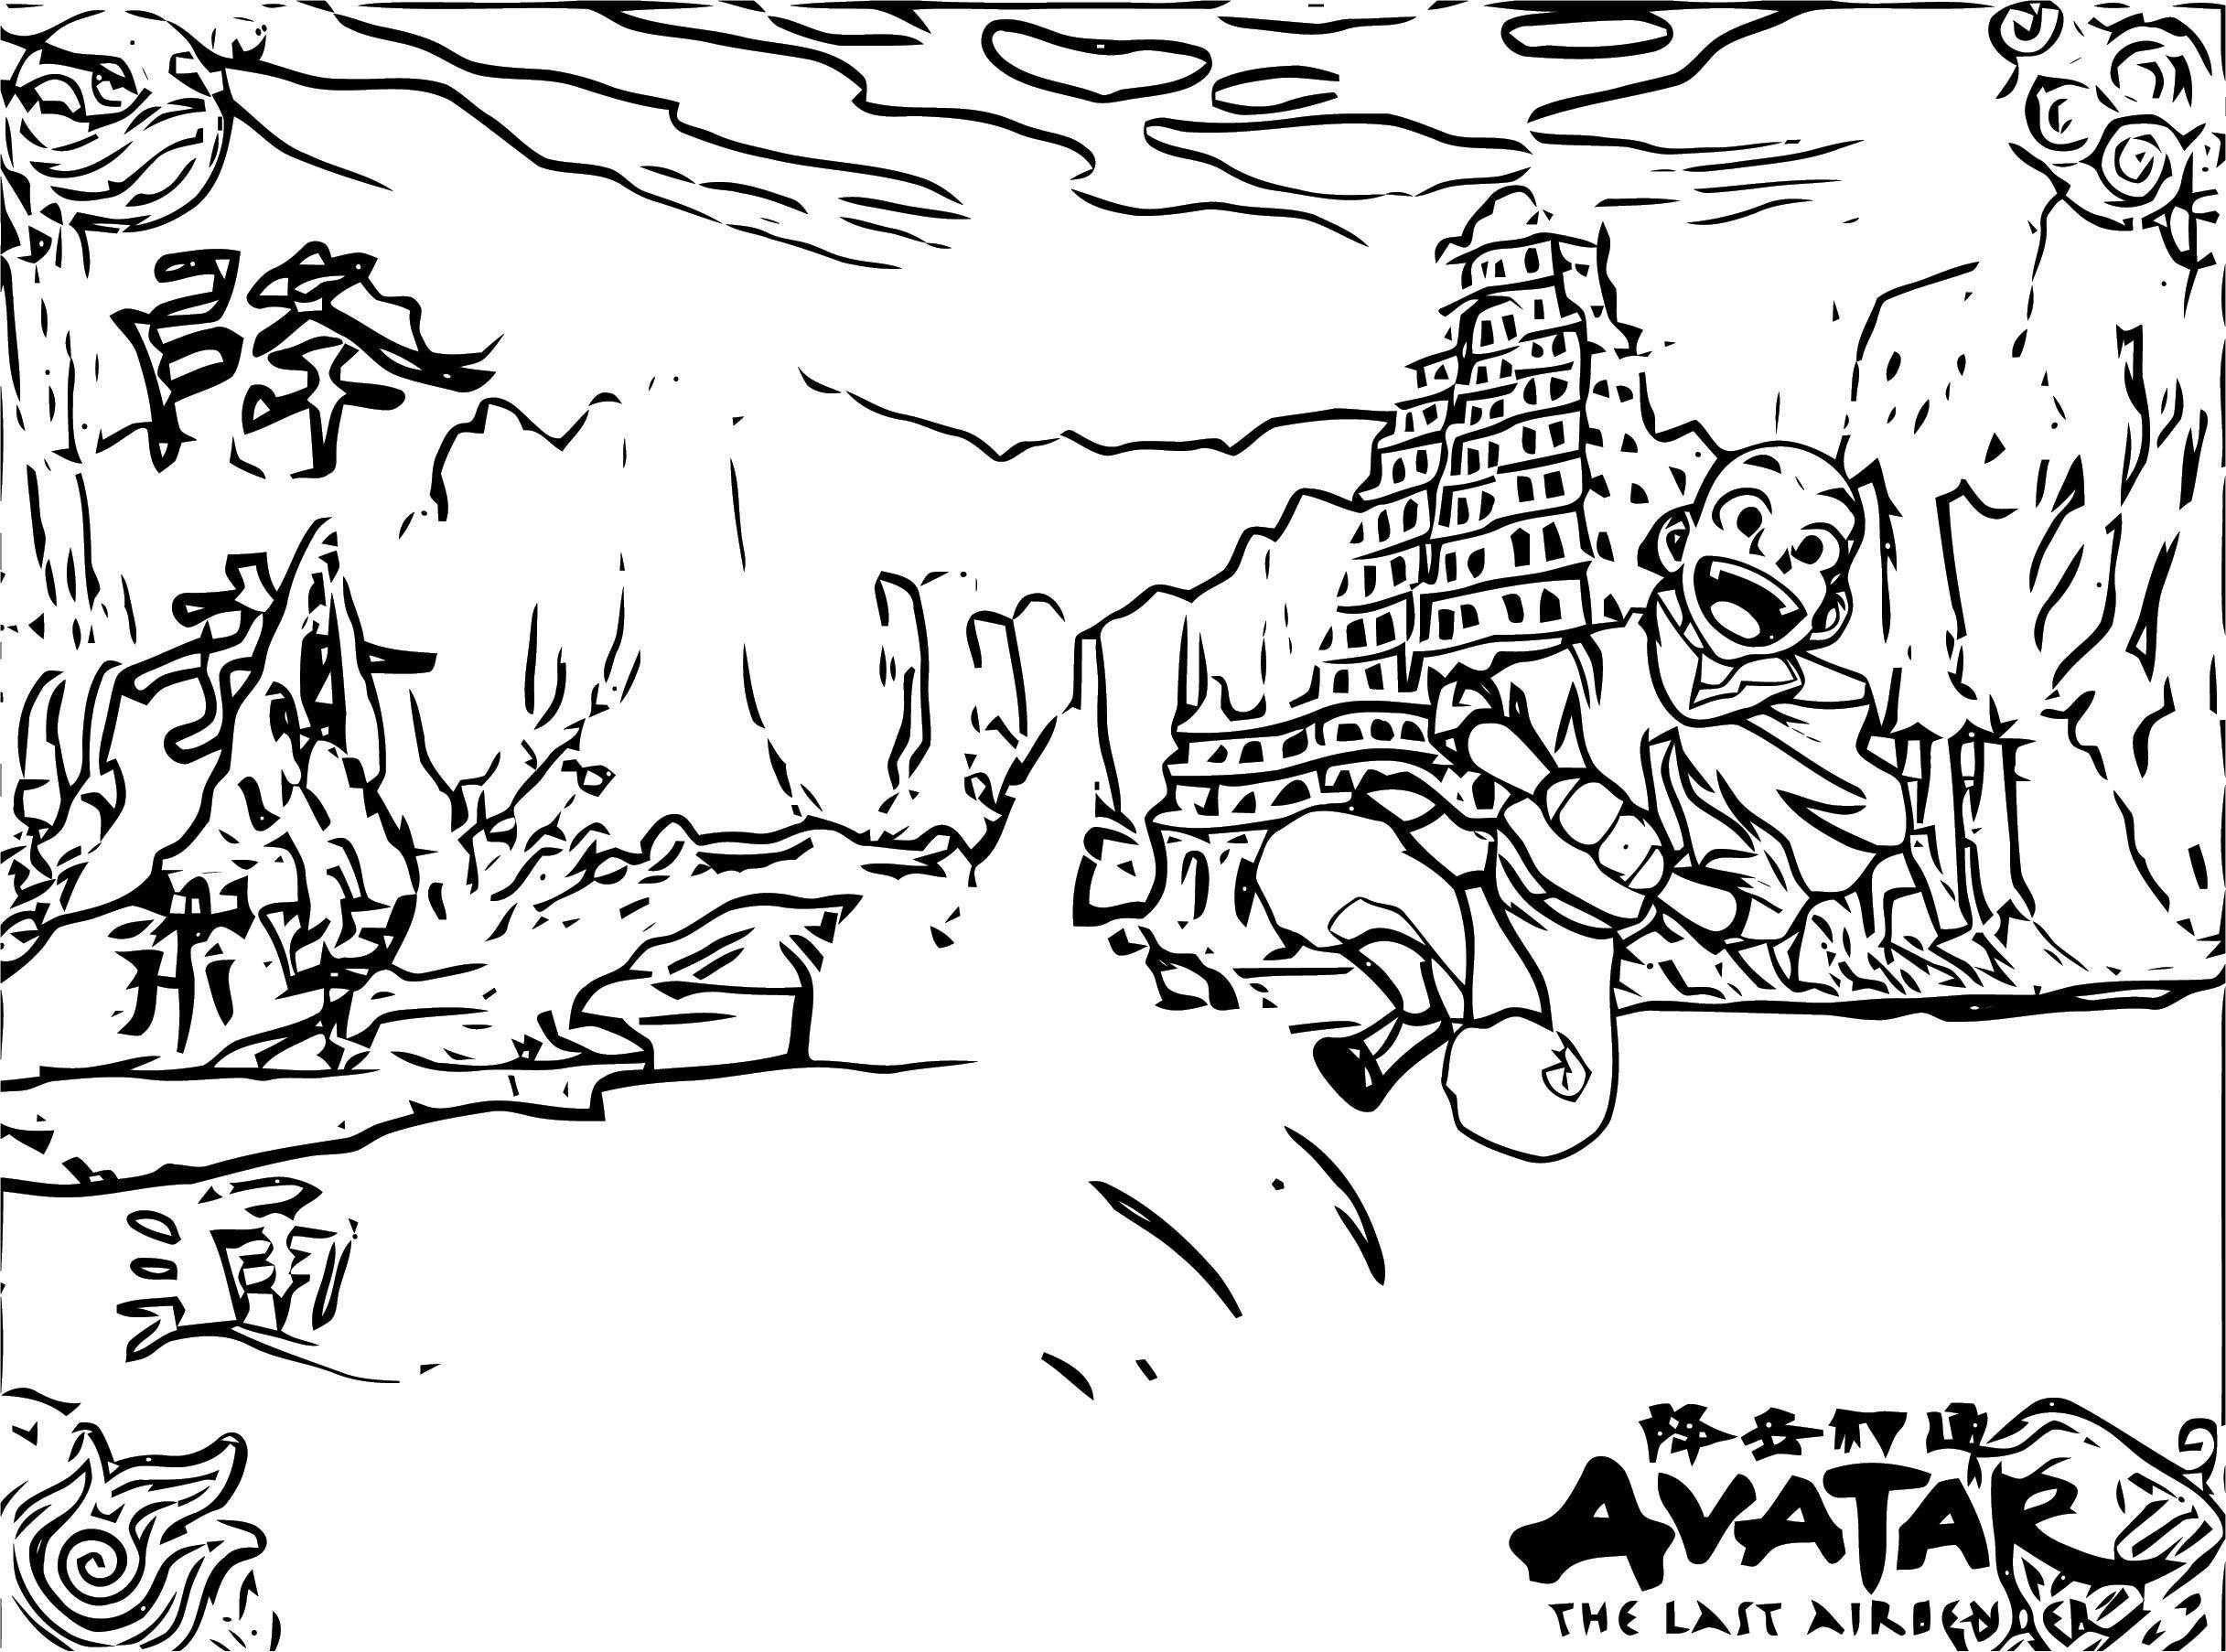 Avatar The Last Airbender Coloring Pages Free Pdf - Coloring Pages Avatar The Last Airbender